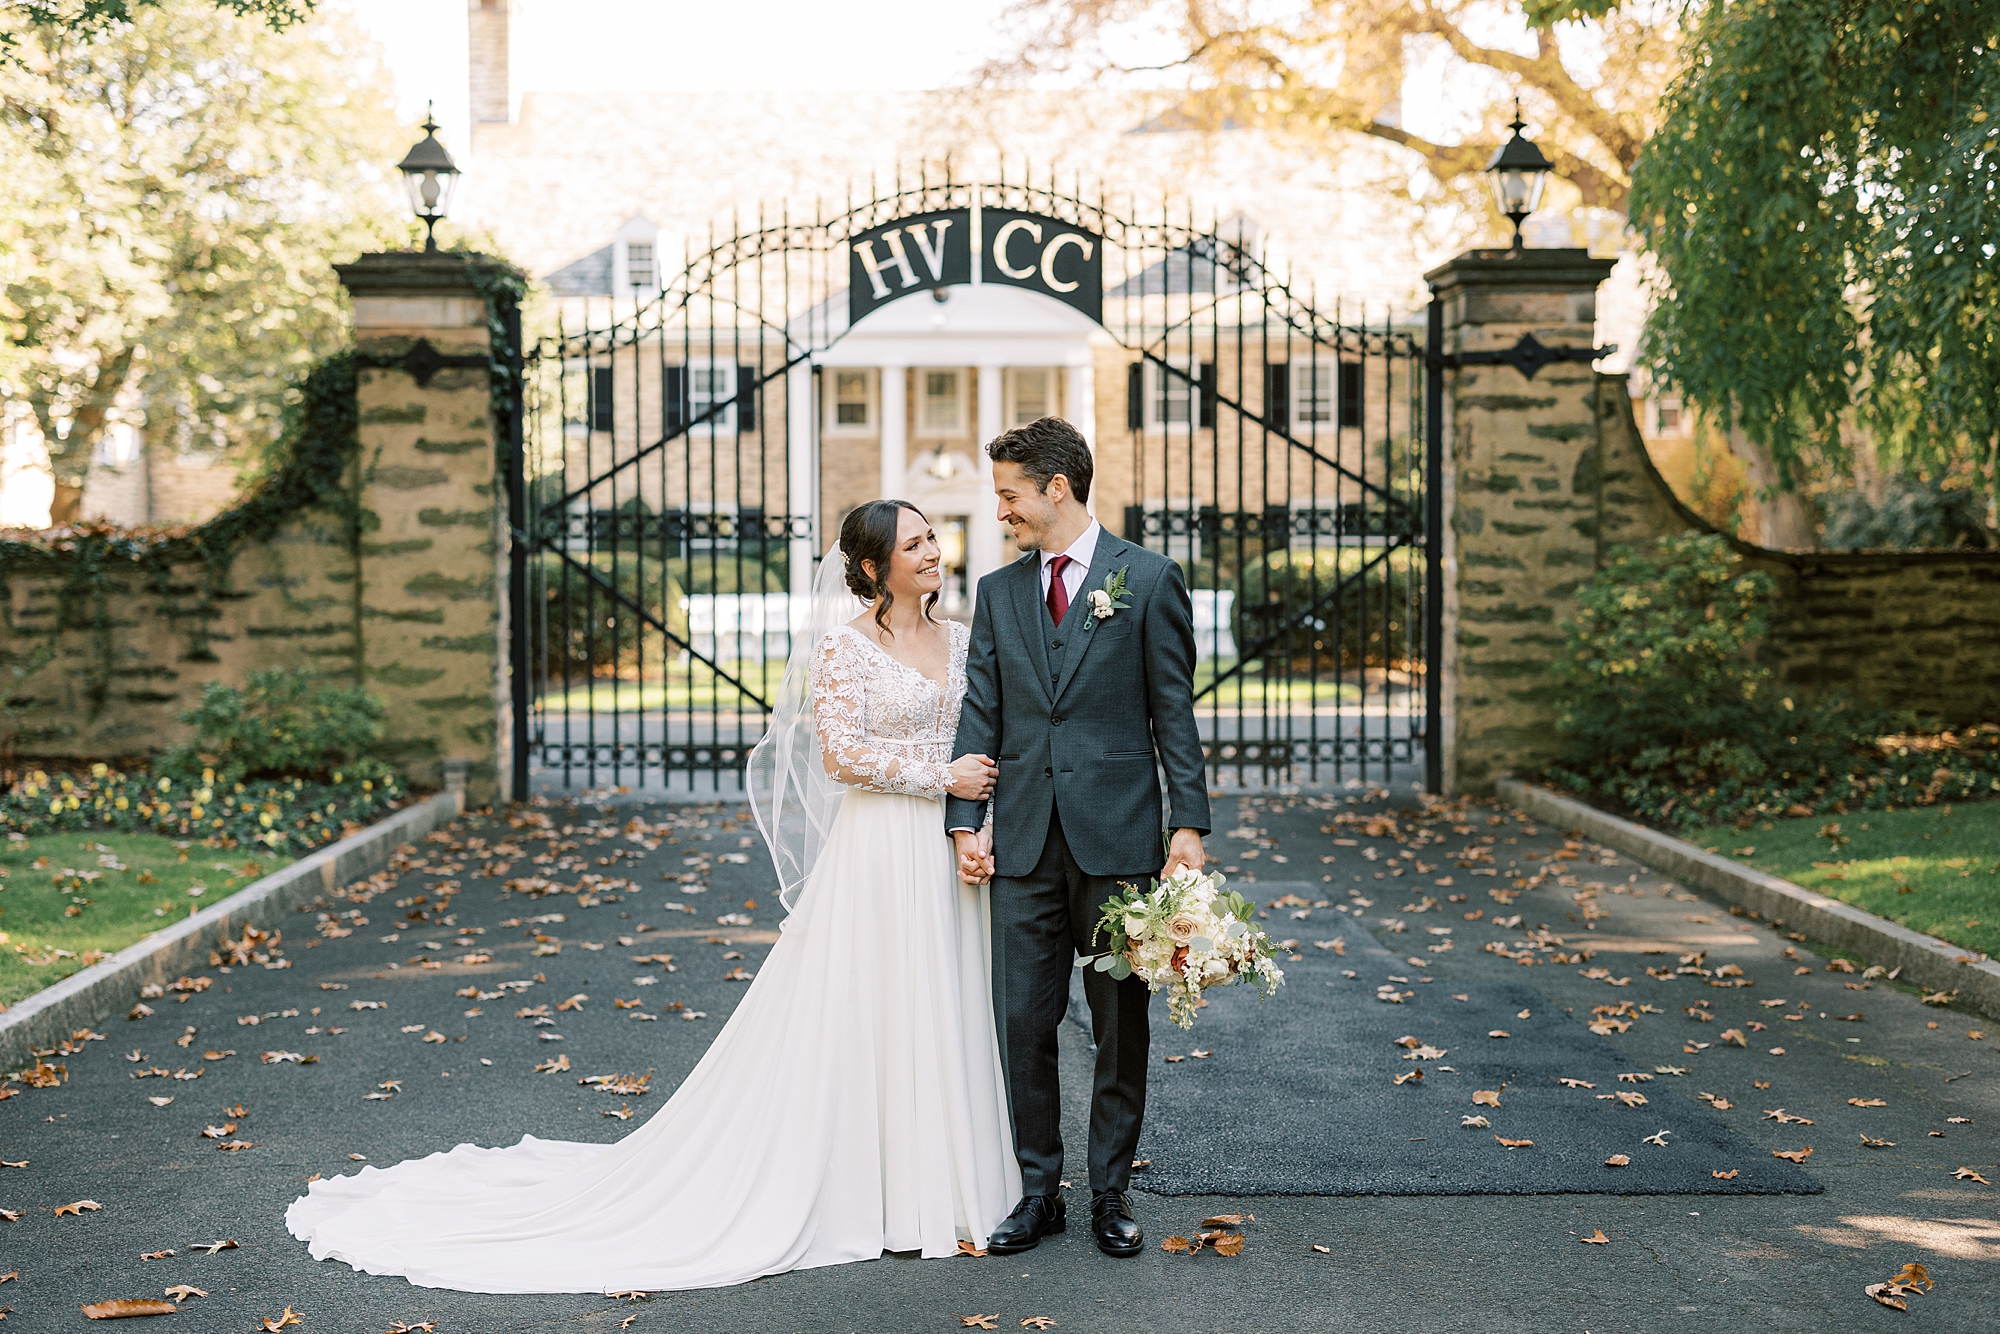 newlyweds stand in front of wrought iron gate at Huntingdon Valley Country Club